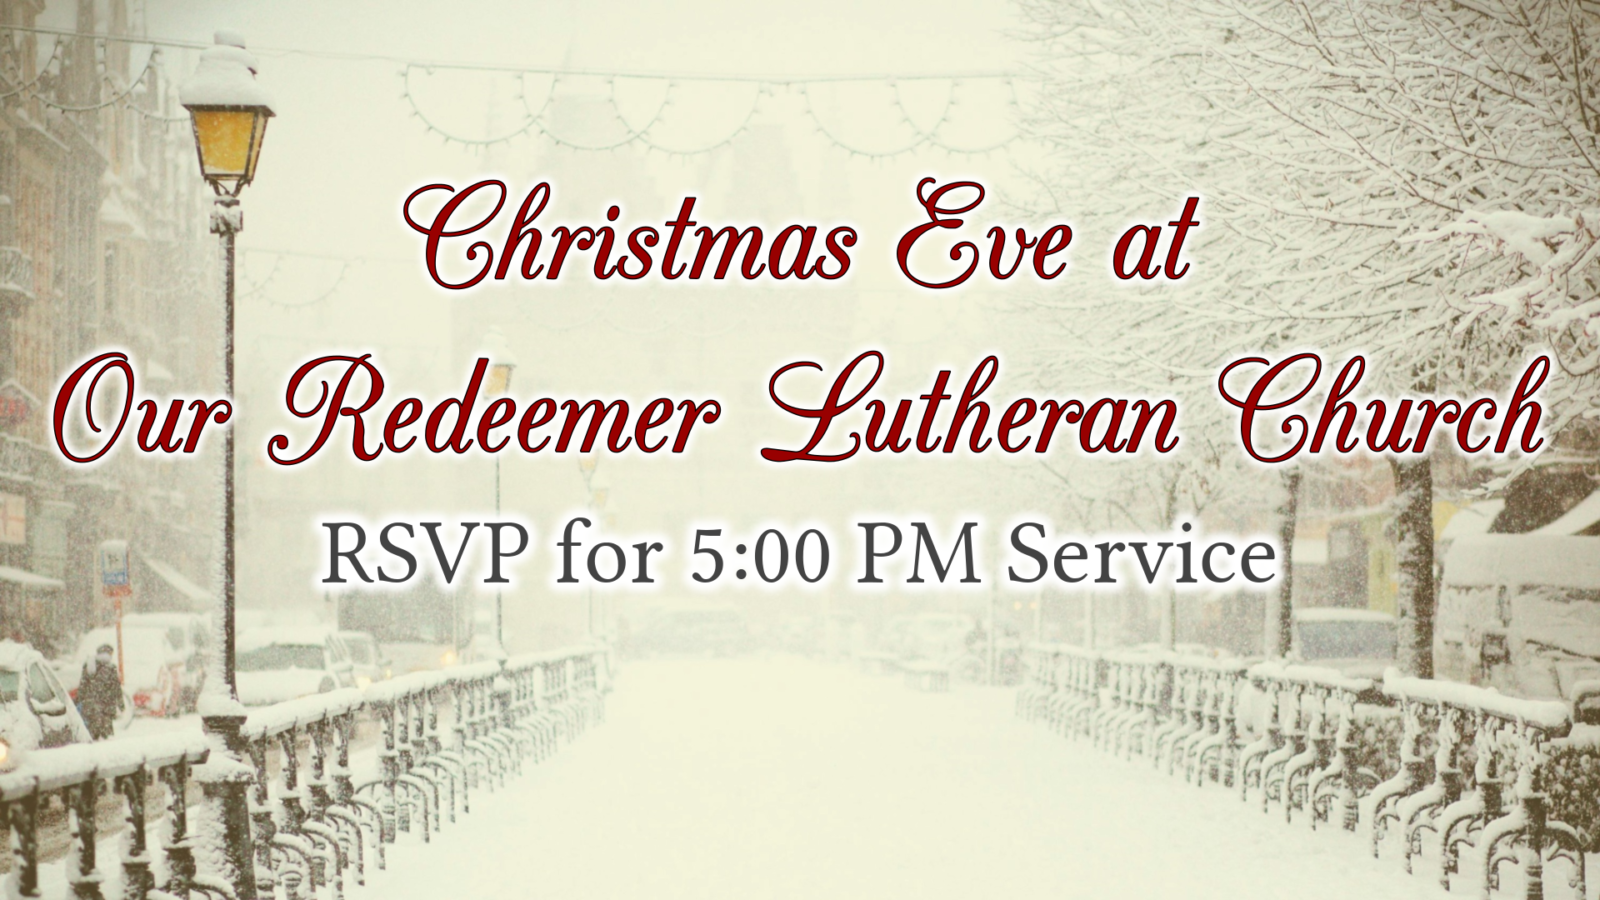 Reminder to RSVP for Christmas Eve Our Redeemer Lutheran Church